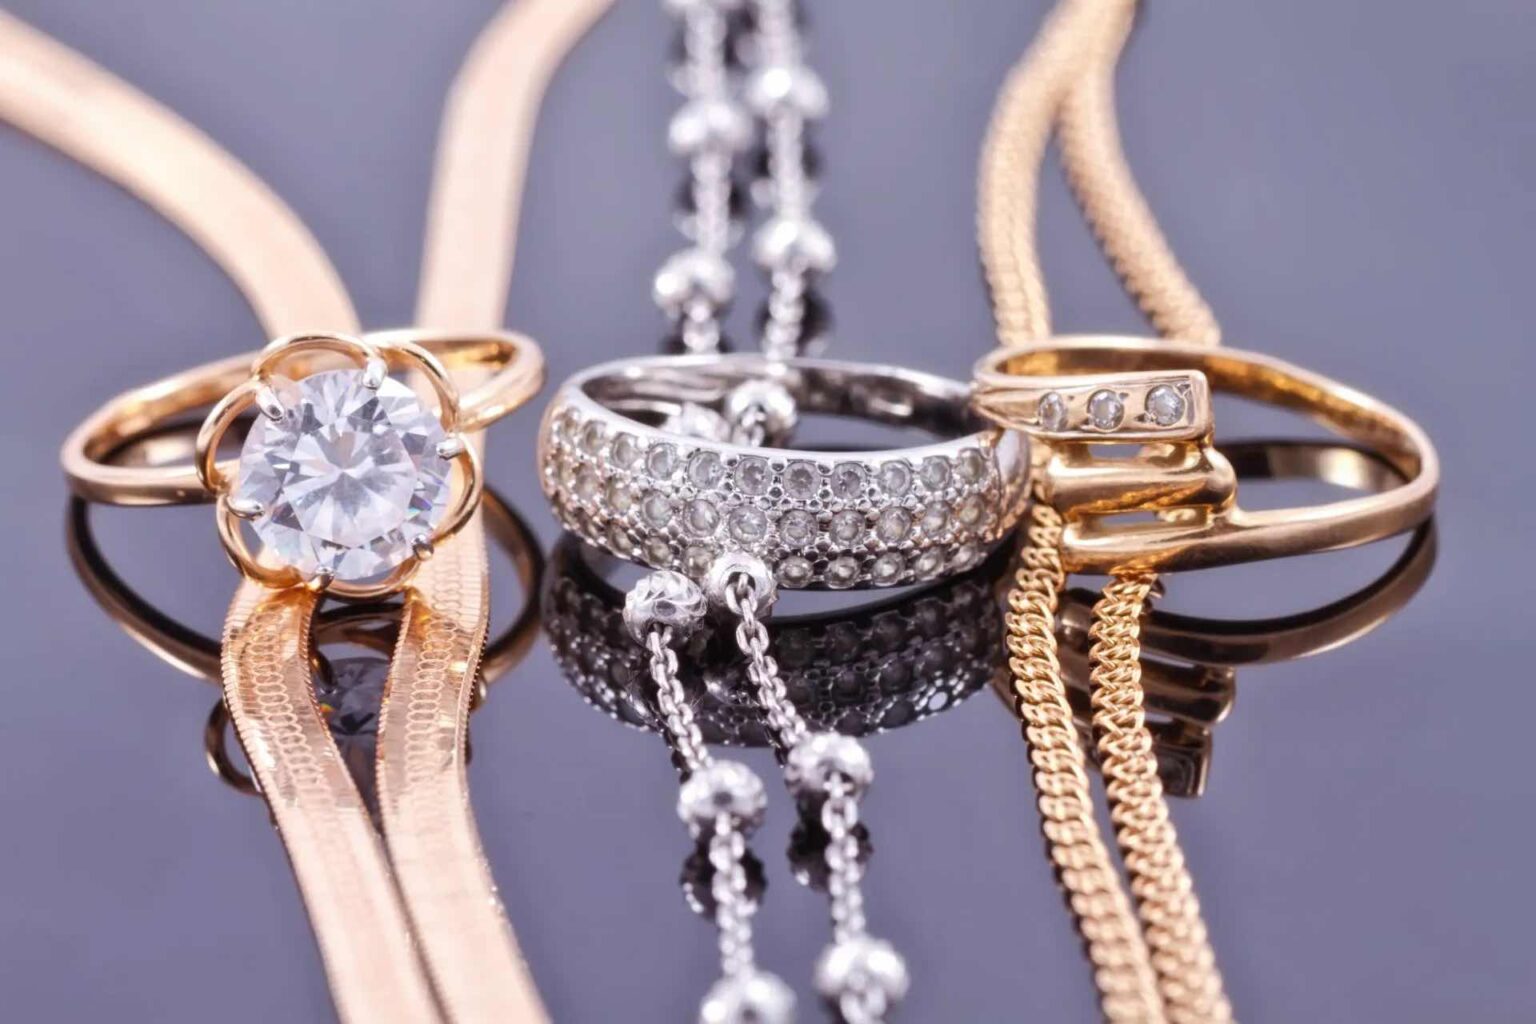 The eternal question for jewelry lovers is gold or silver? Discover the benefits of each color and which one fits you better. Here's all you need to know.